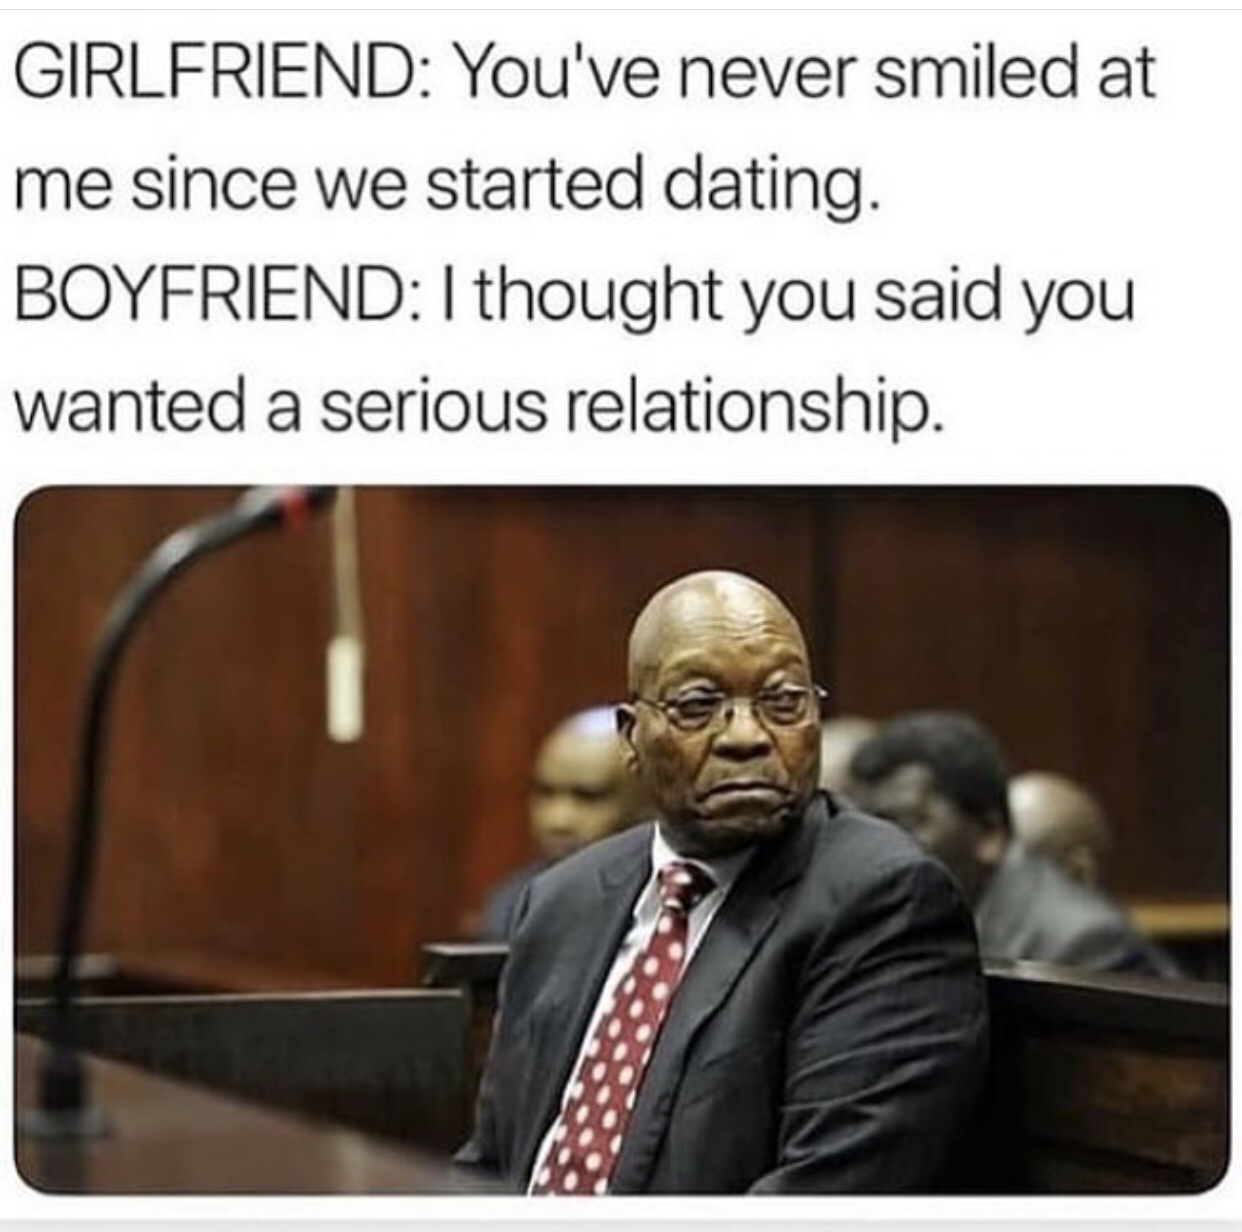 human behavior - Girlfriend You've never smiled at me since we started dating. Boyfriend I thought you said you wanted a serious relationship.